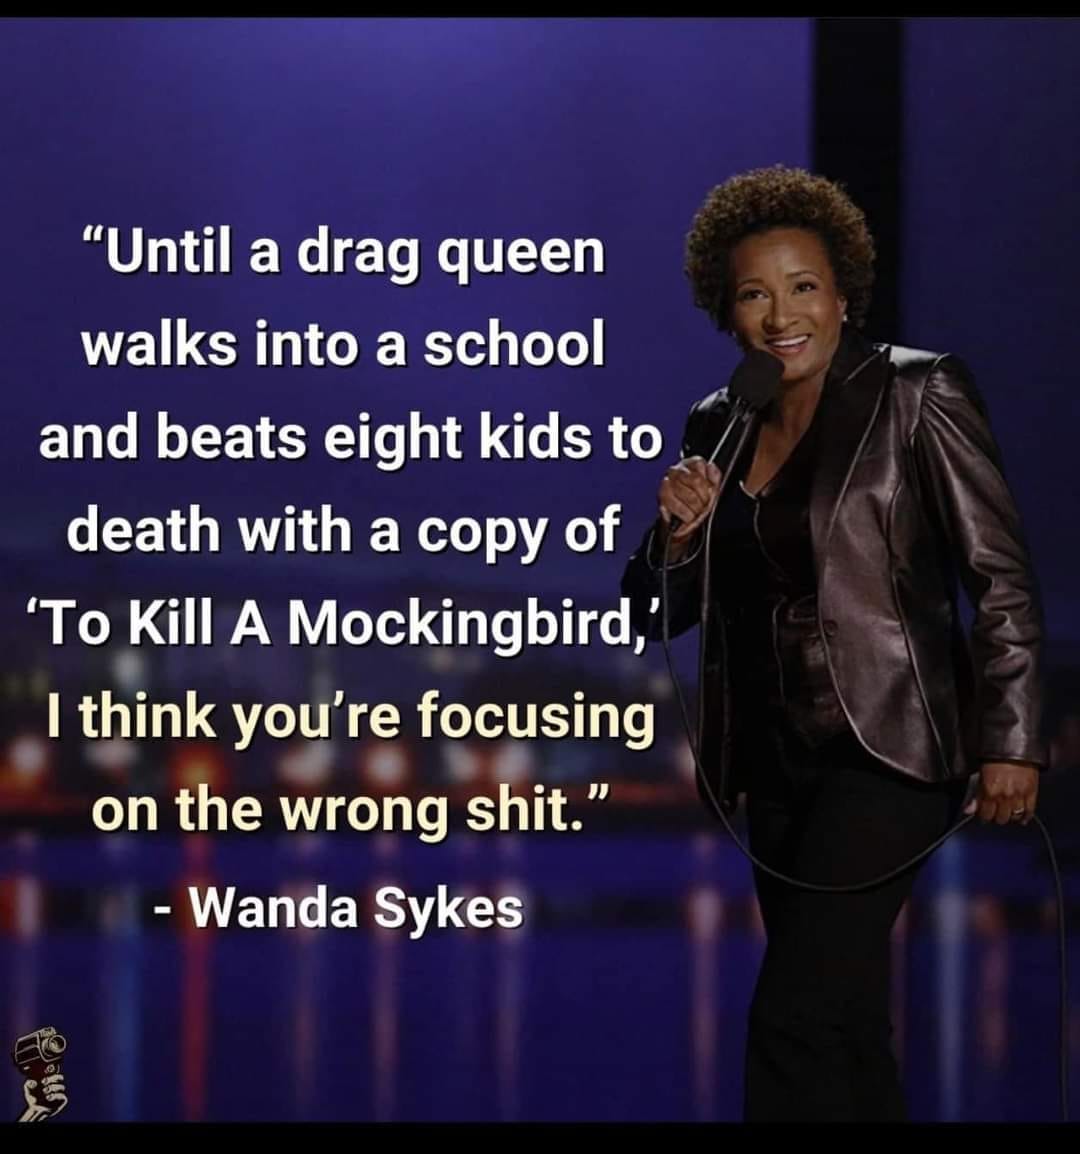 “Until a drag queen walks into a school and beats eight kids to death with a copy of ‘To Kill a Mockingbird,’ I think you’re focusing on the wrong shit." - Wanda Sykes